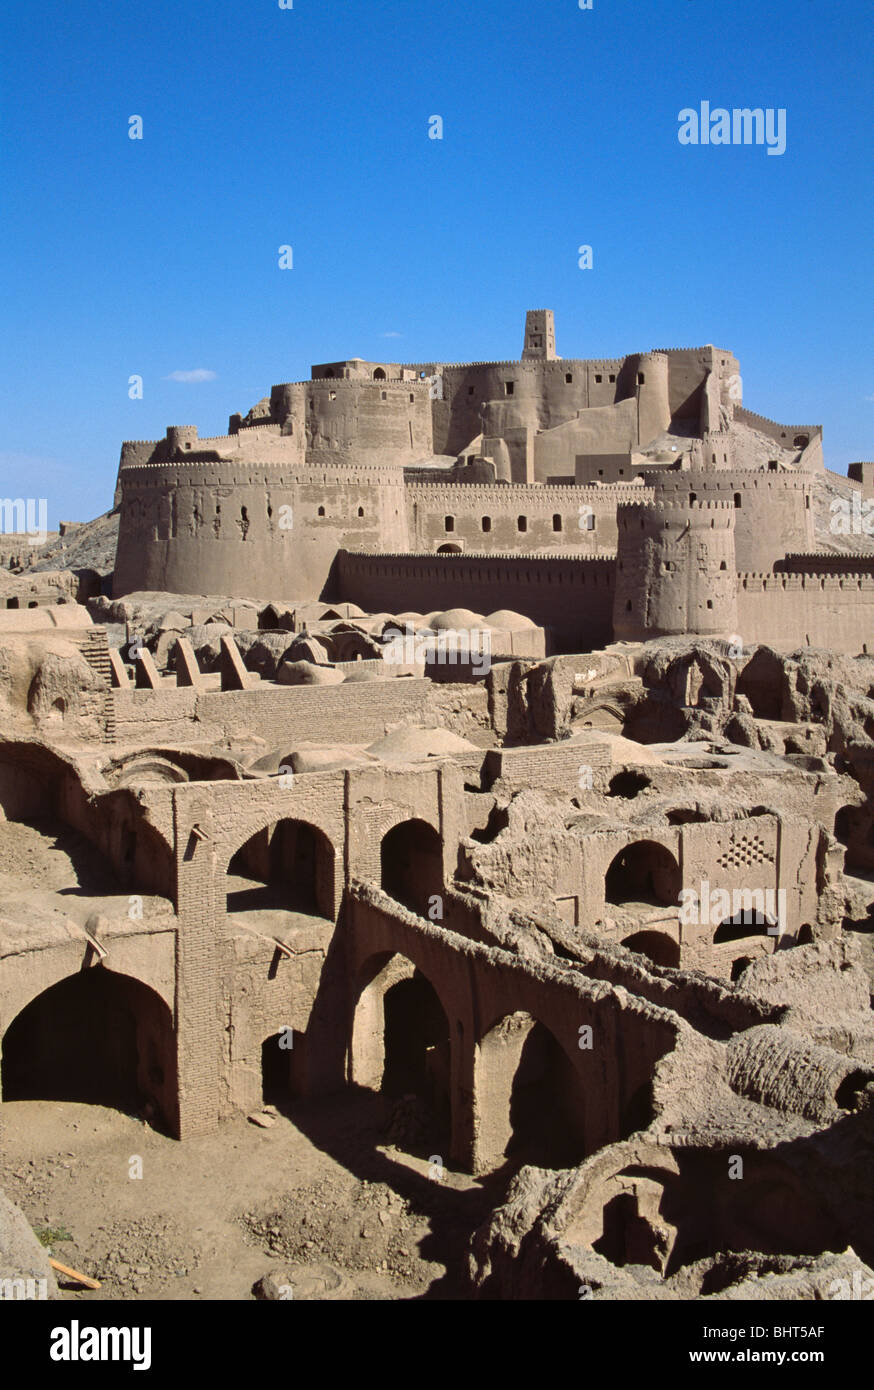 Overview of ruined citadel of Arg-e-Bam, Iran Stock Photo